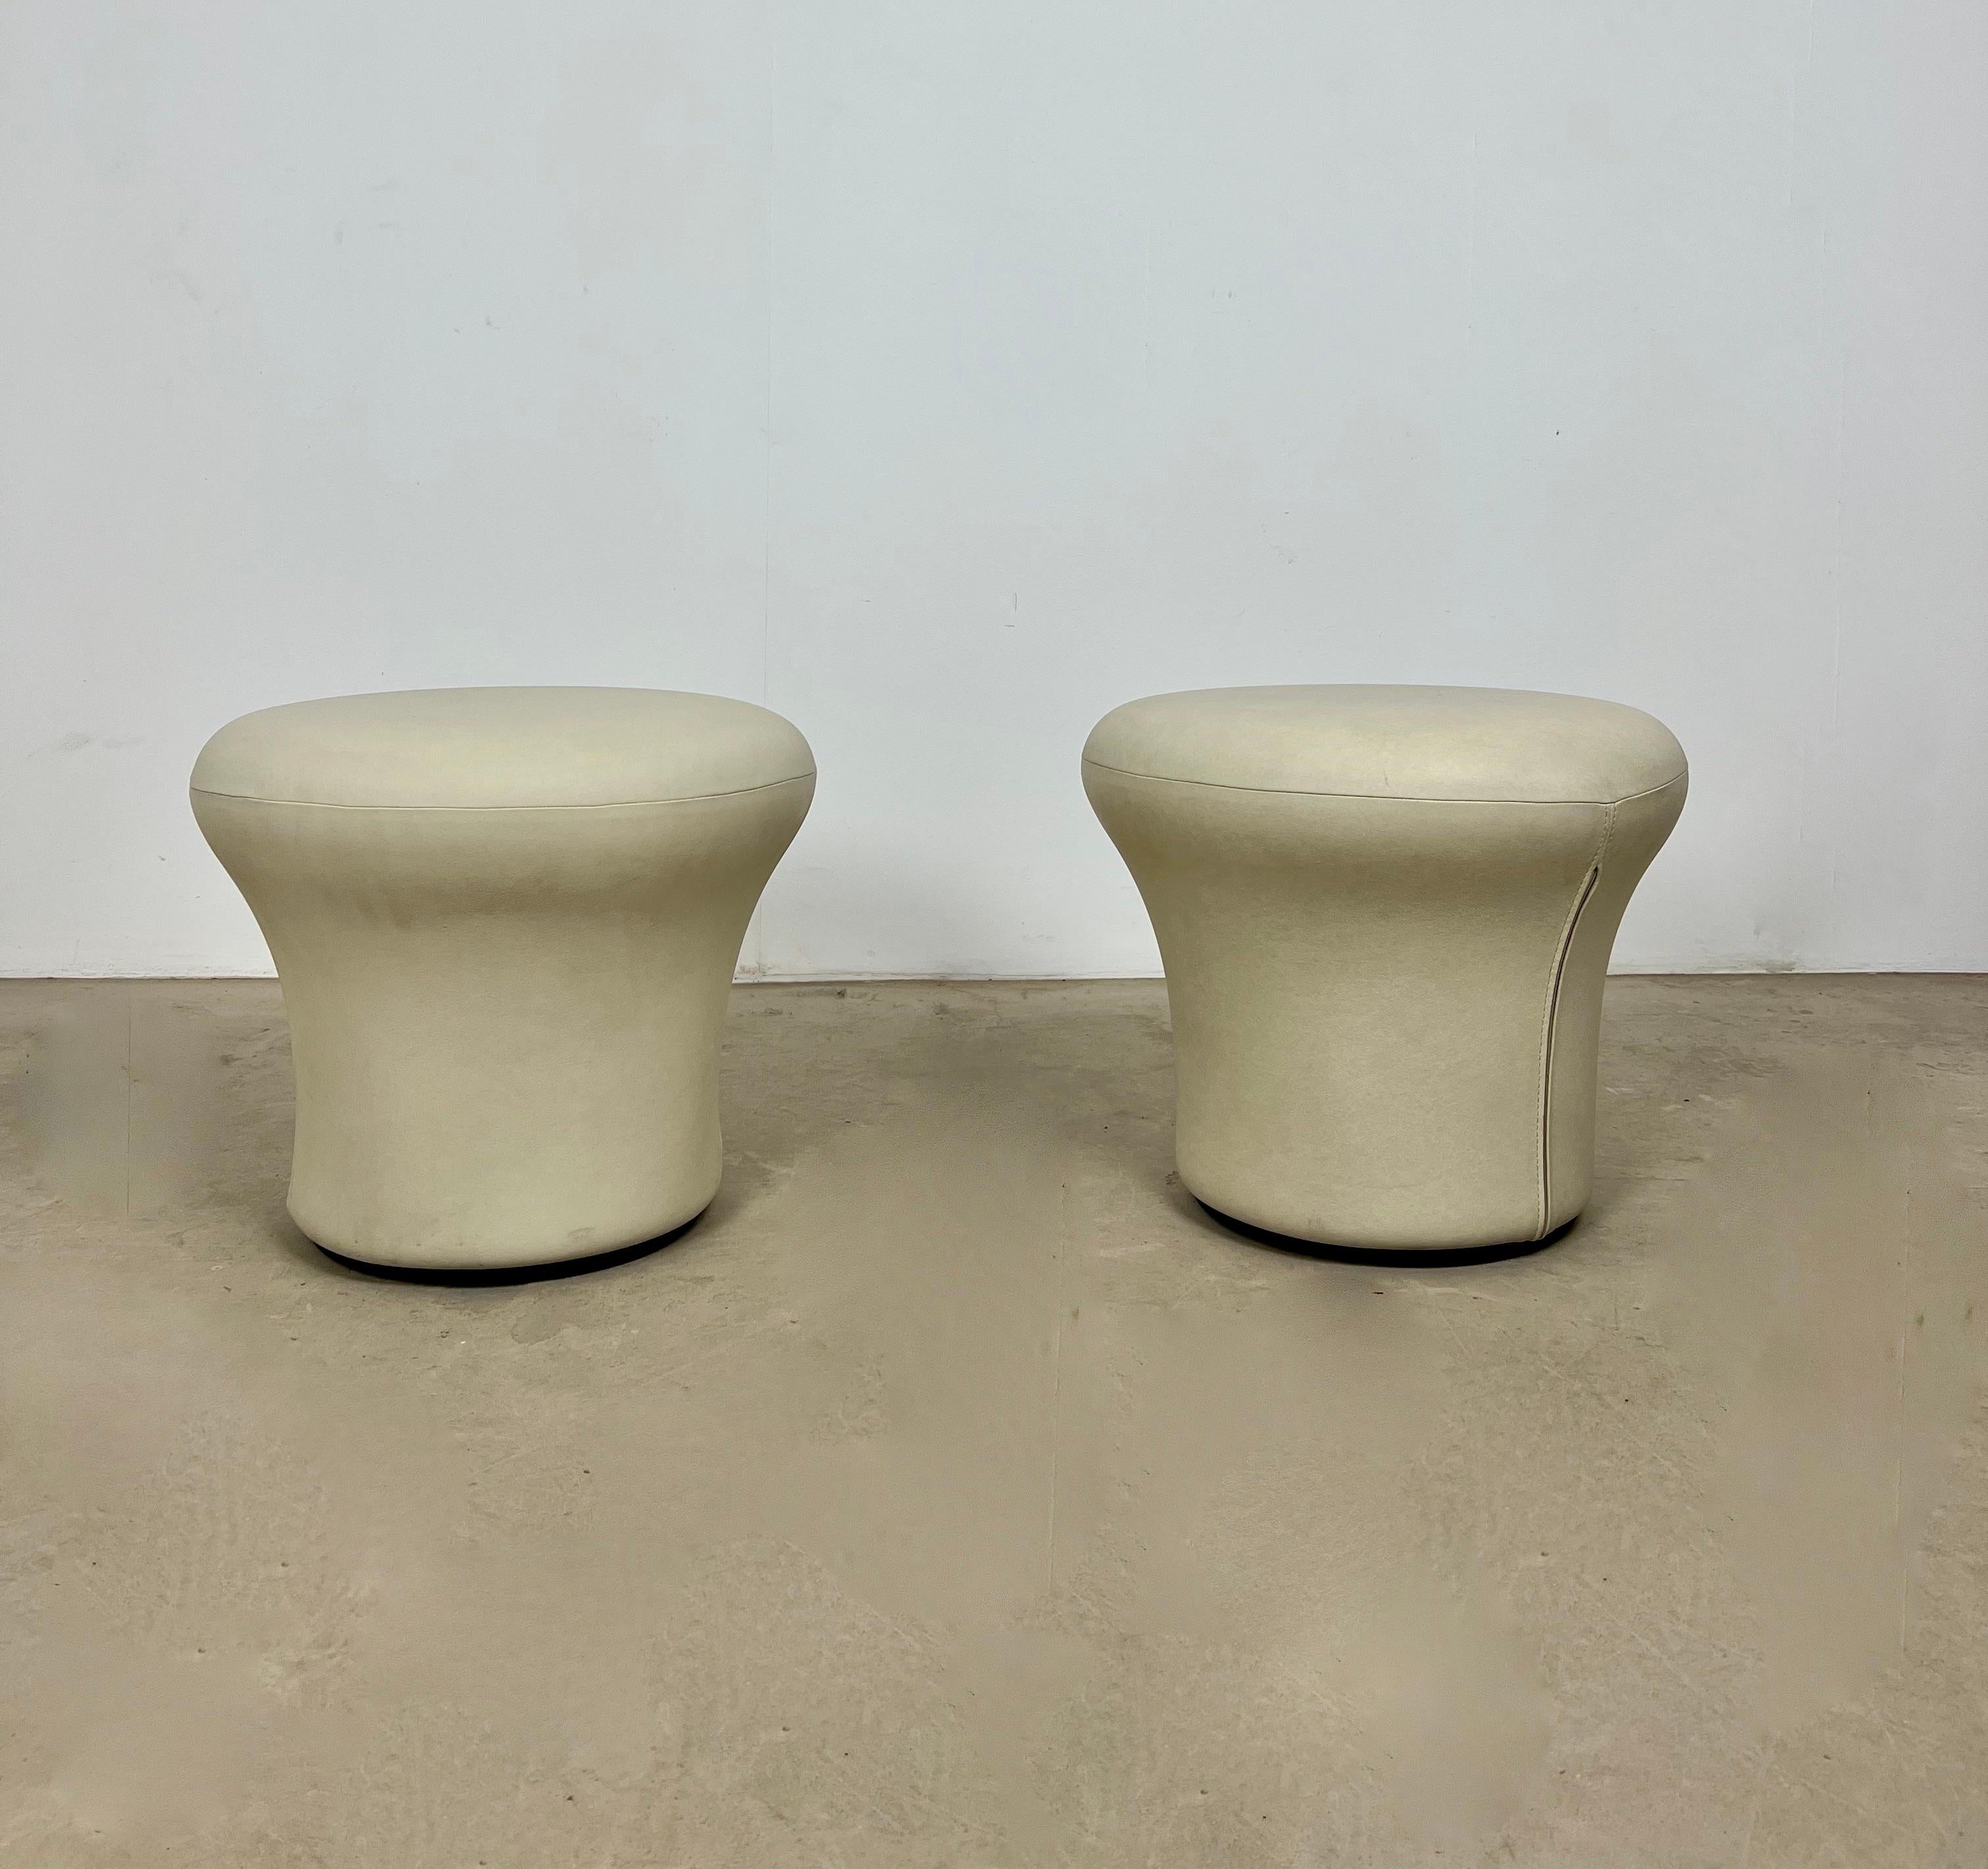 Pair of stools stamped Artifort. Wear due to time and age of stools.